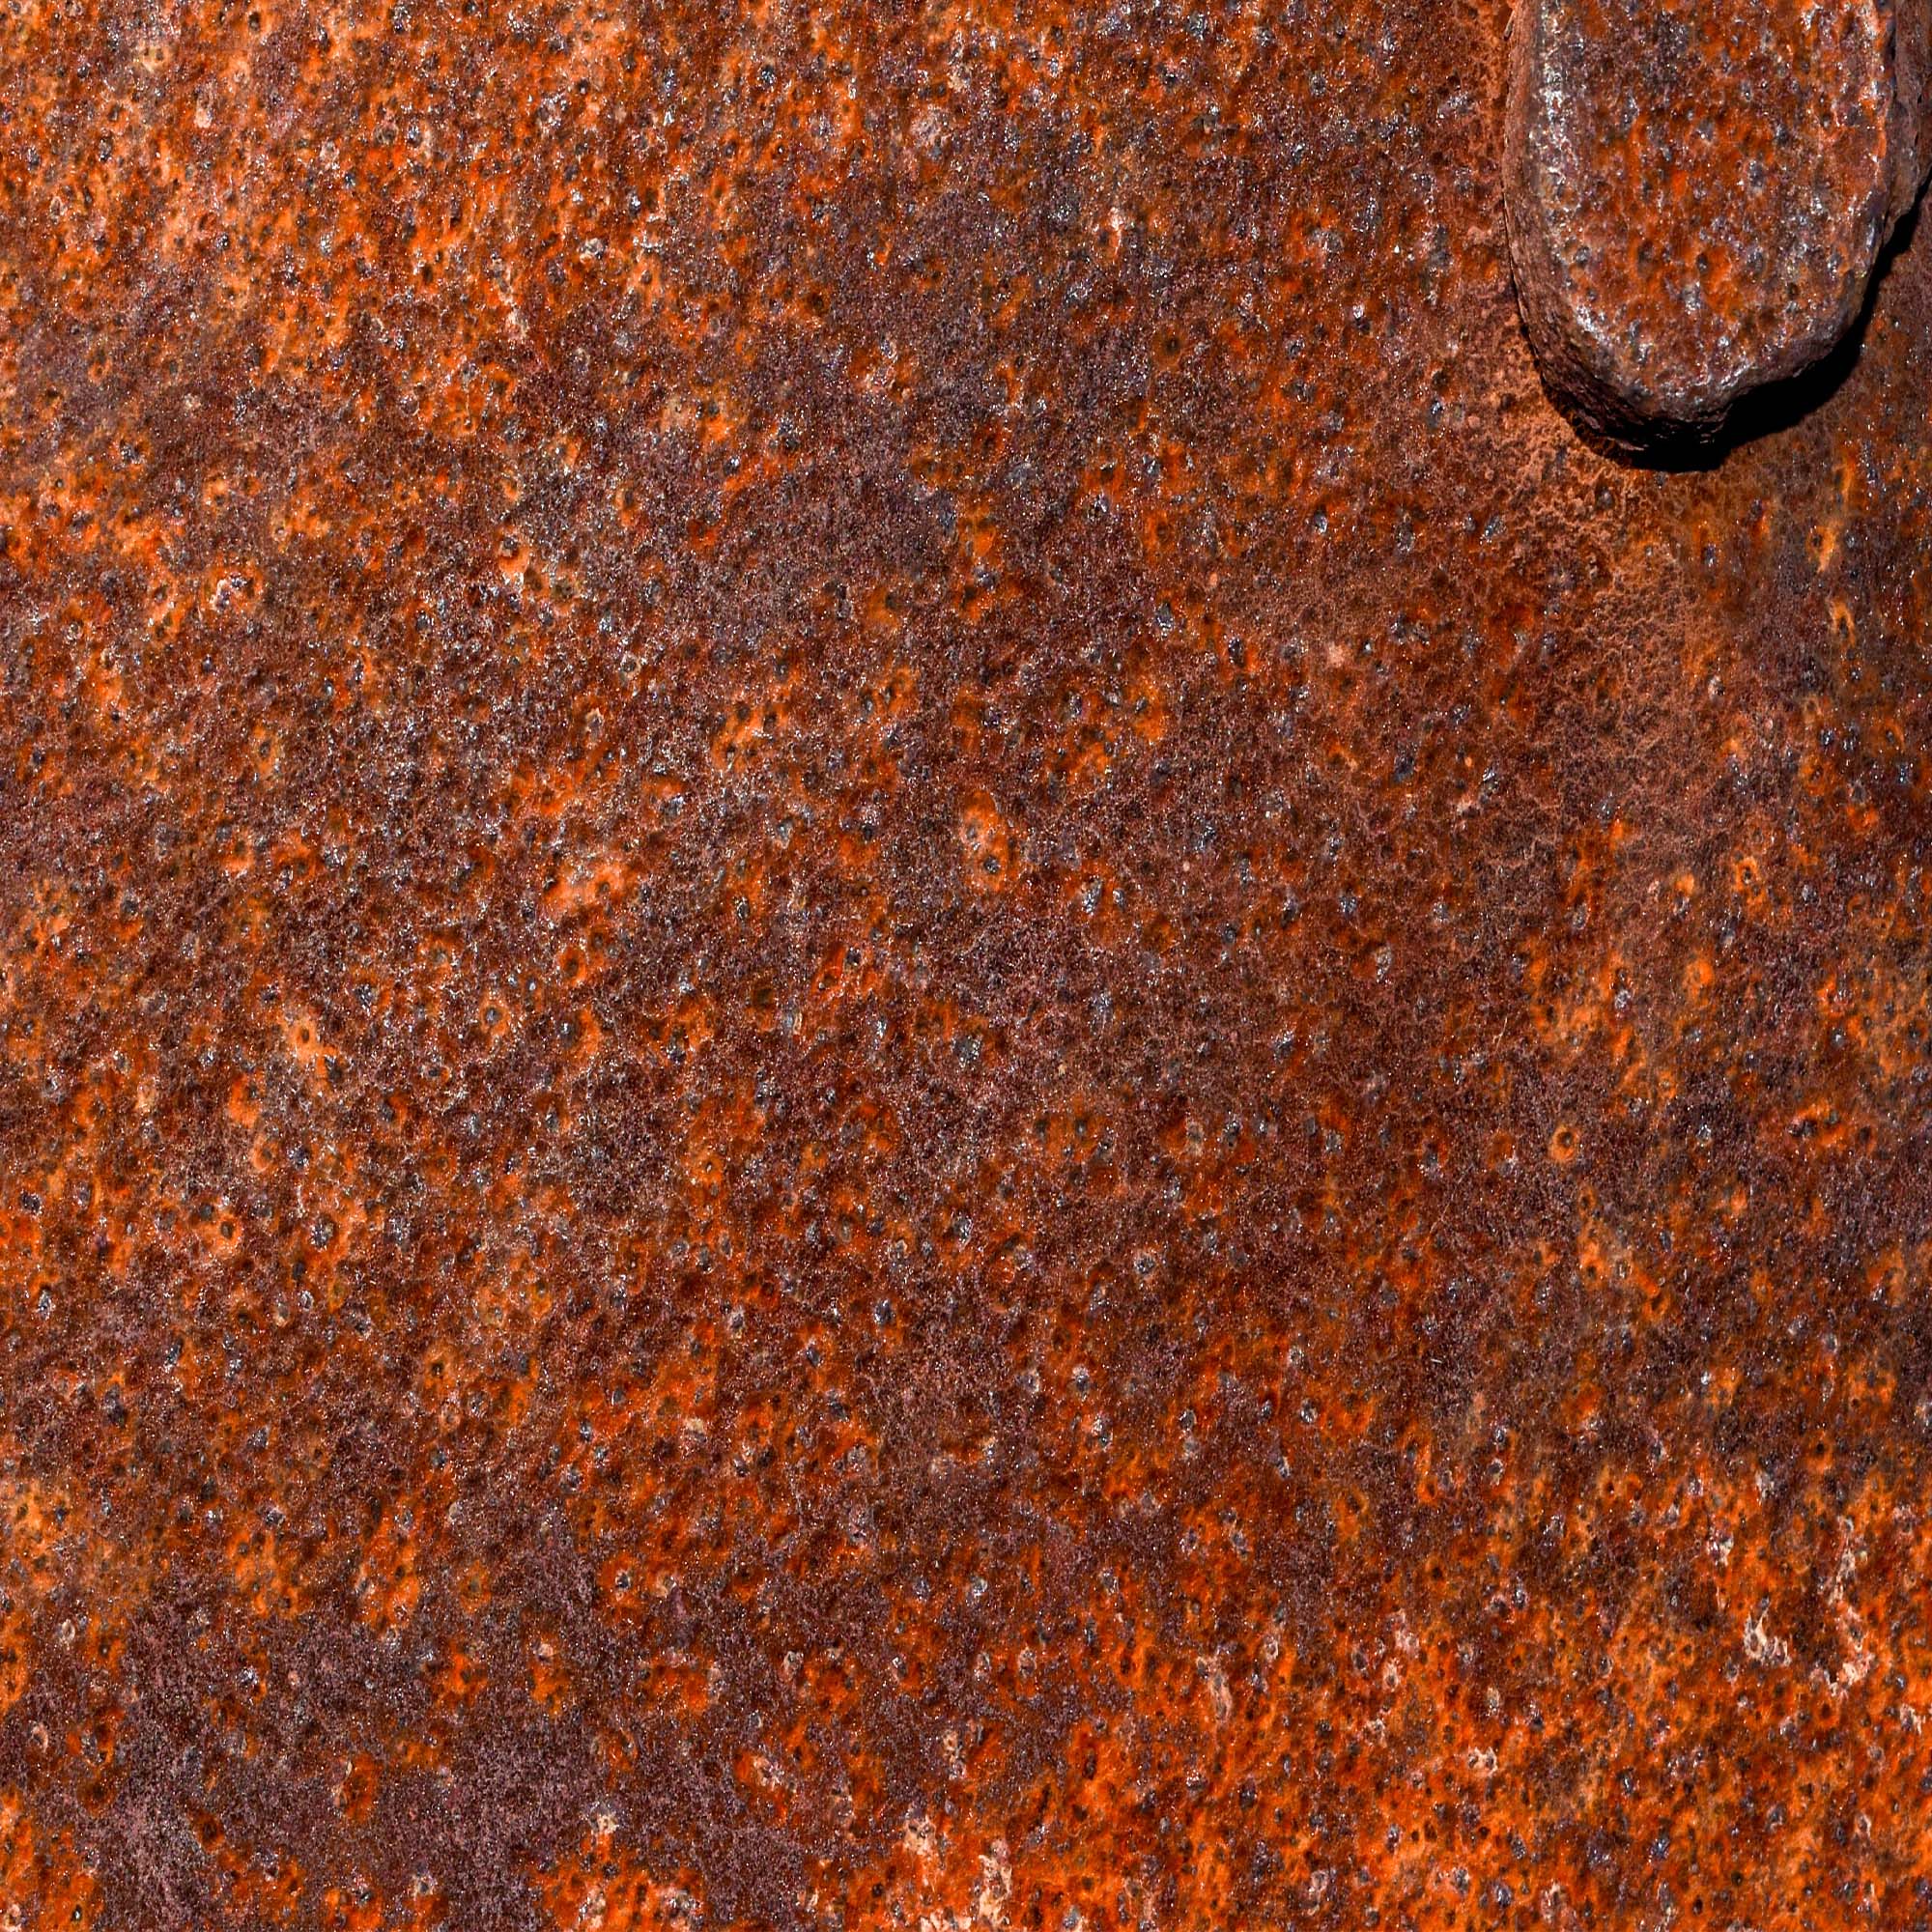 uniform corrosion of metal surface due to lack of nickel chrome plating